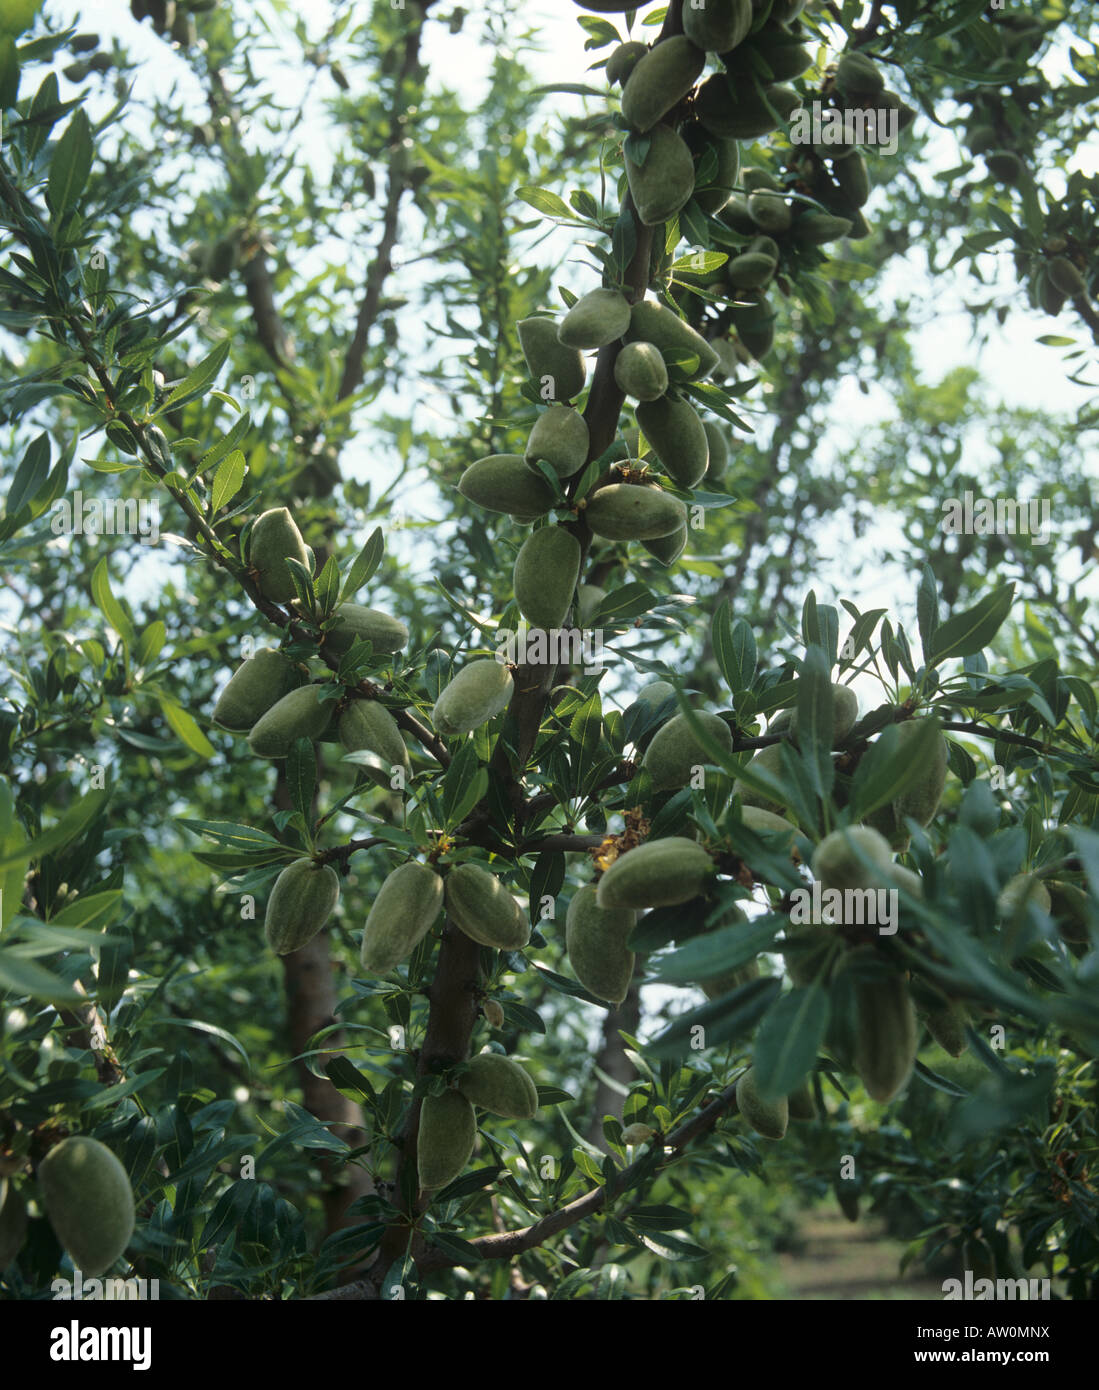 Immature almond fruit on the tree in Greece Stock Photo